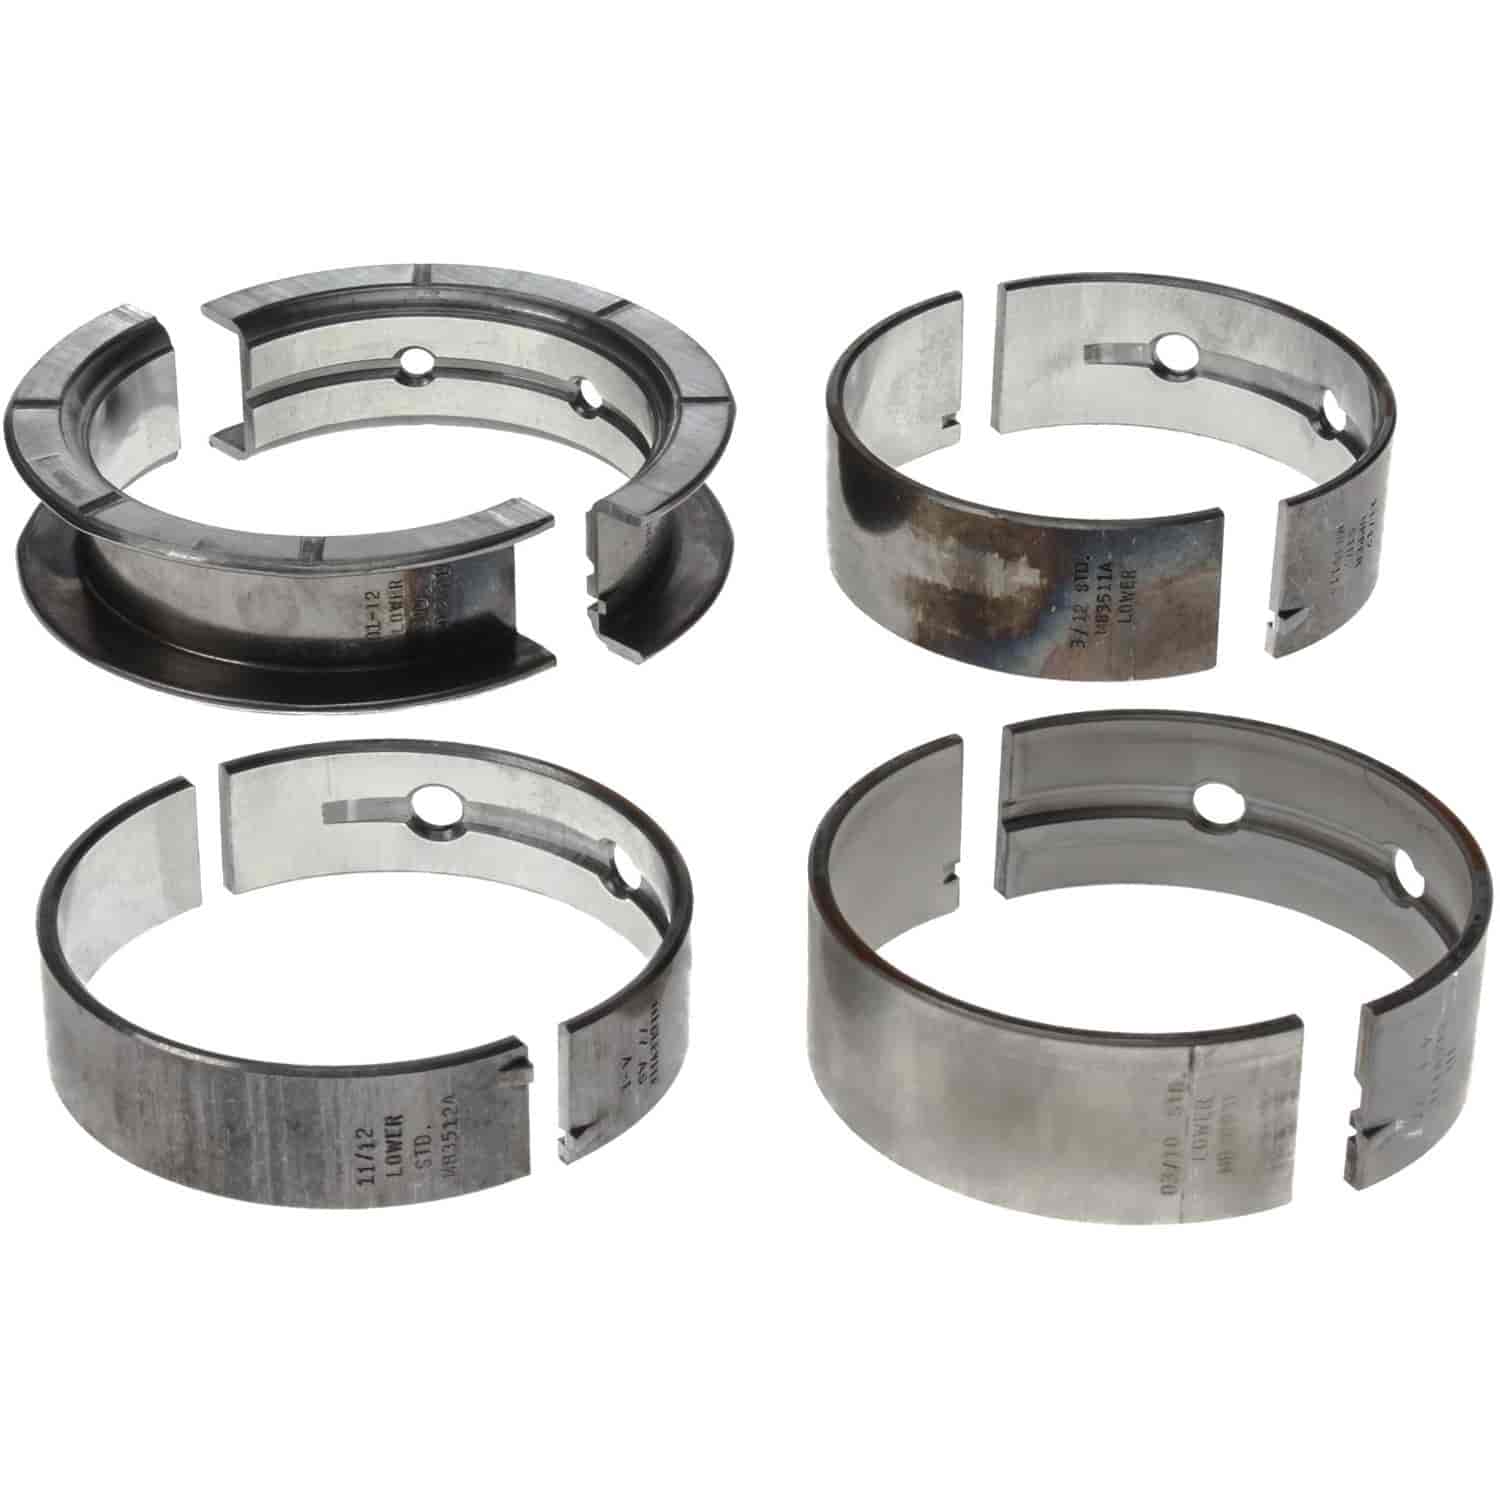 Main Bearing Set Chevy 2006-2007 V6 3.5L with Standard Size